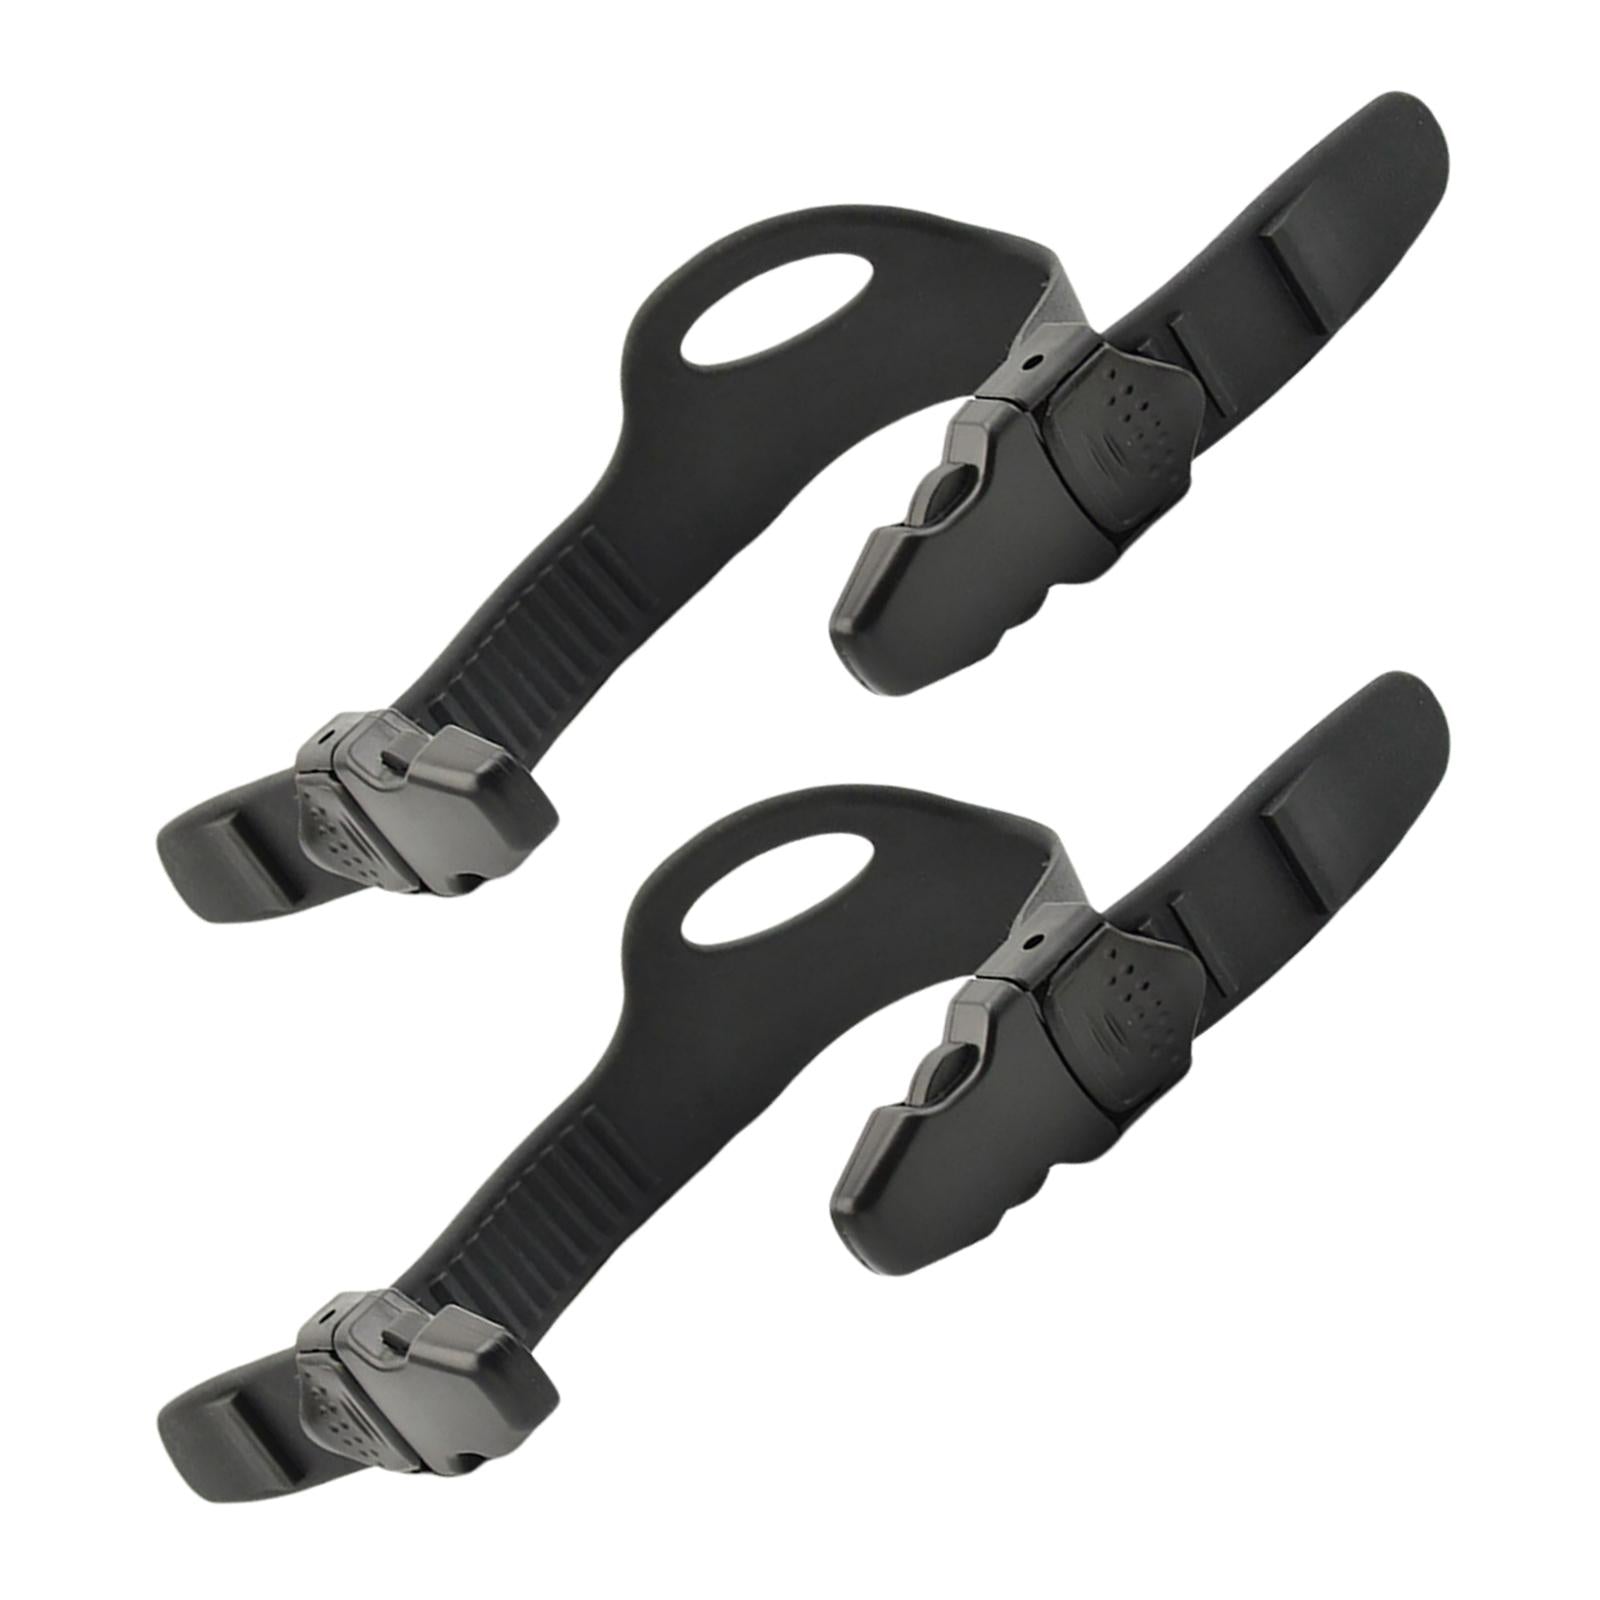 2 Pieces Diving Quick Release Fin Straps Adjustable Scuba with Buckles M